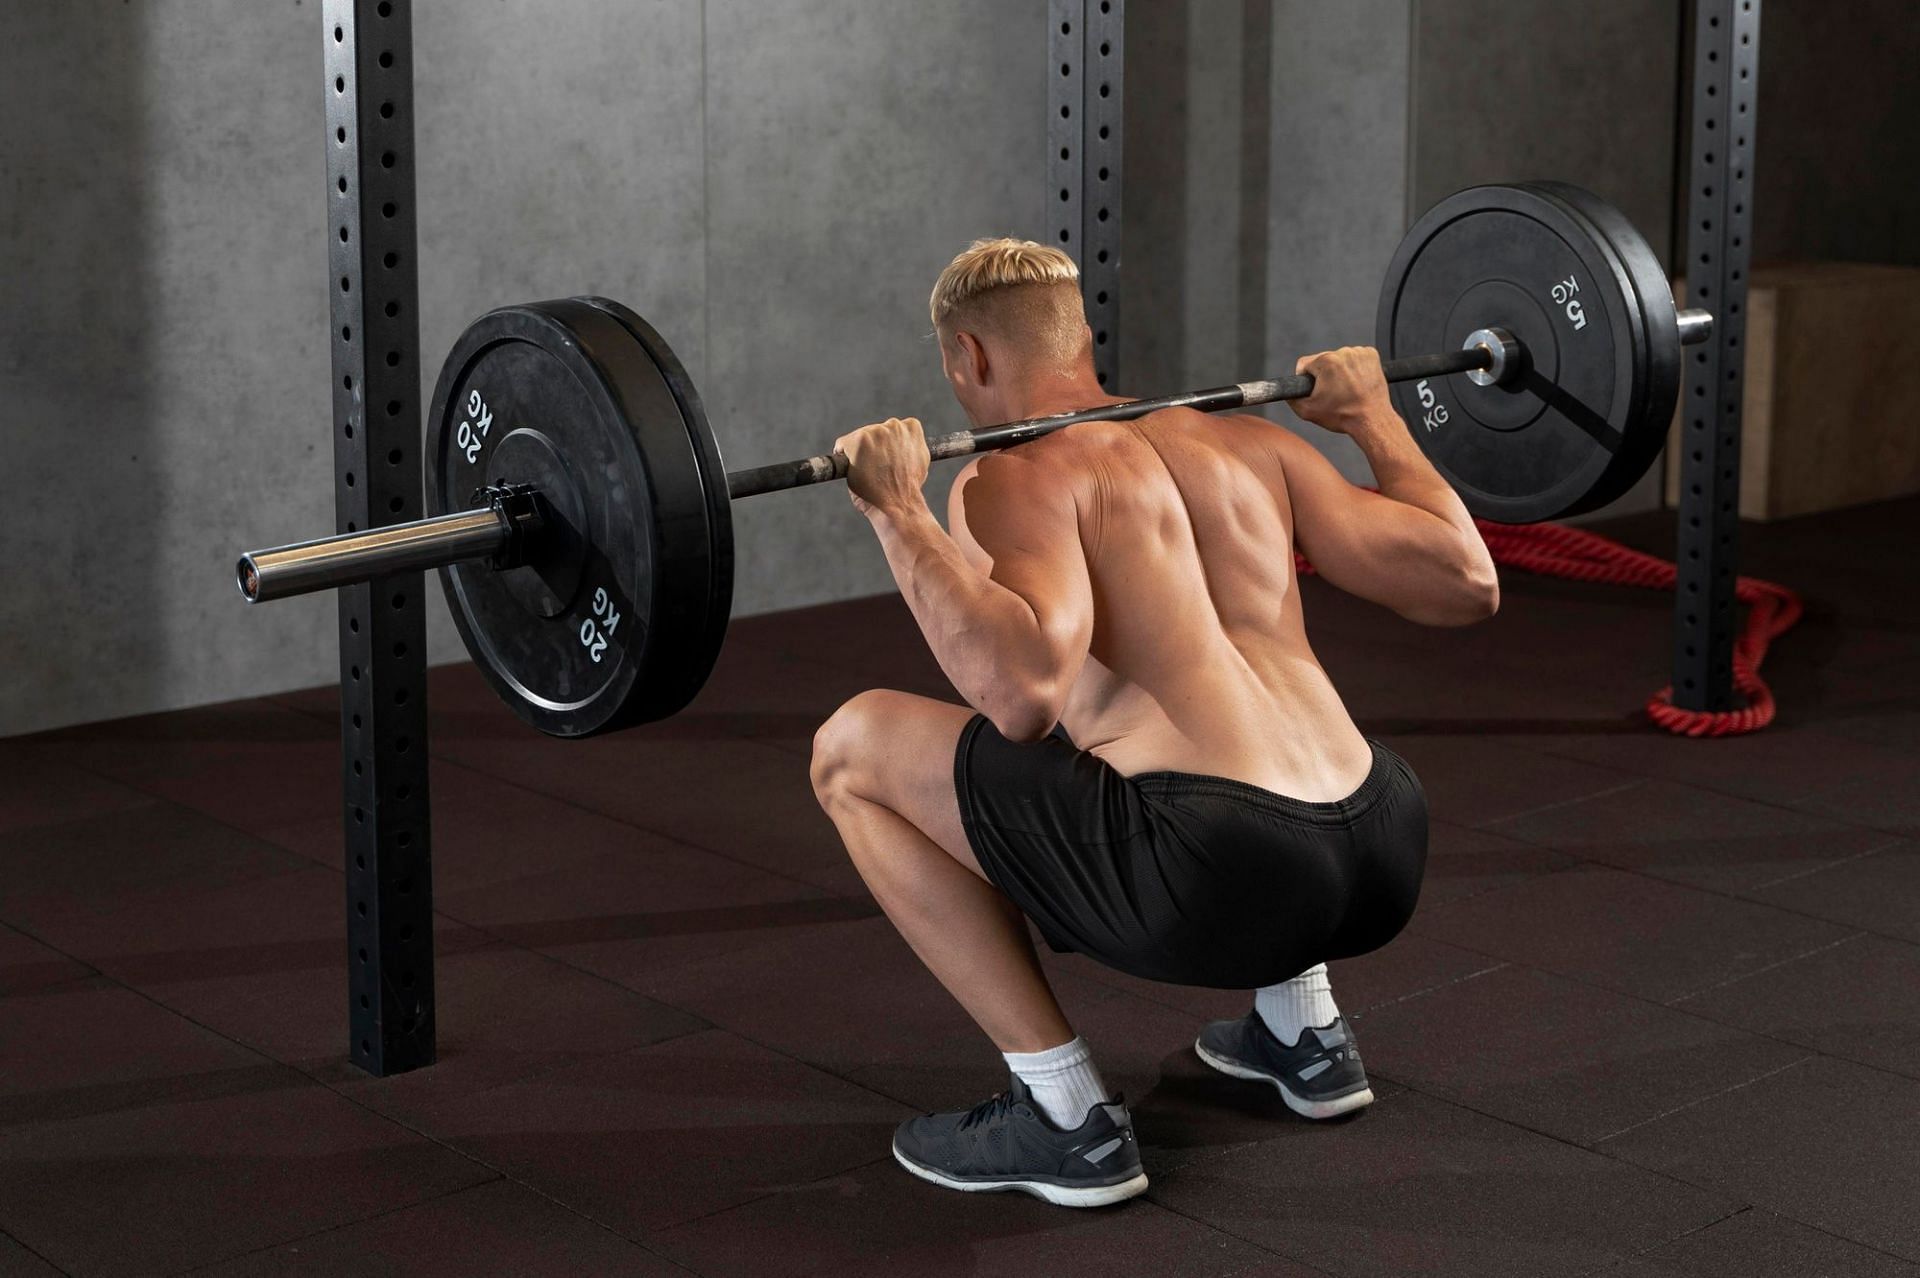 Barbell back squats are a great strength training exercise for fat loss. (Image via Freepik)